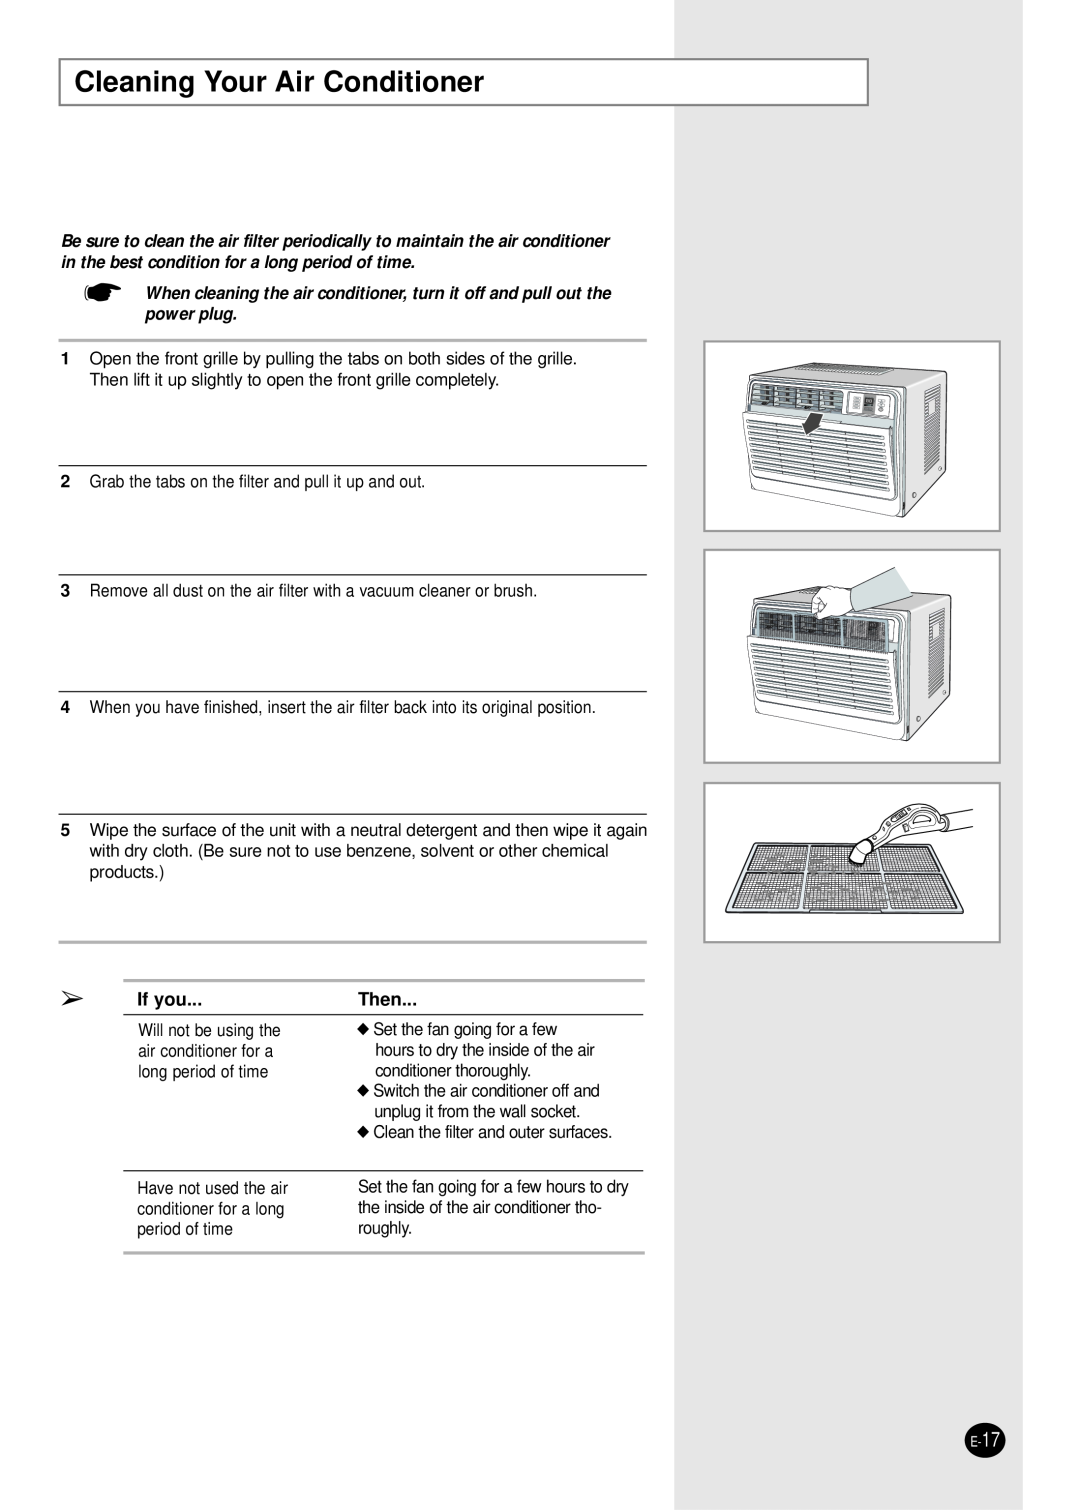 Samsung manual Cleaning Your Air Conditioner, If you, Then 